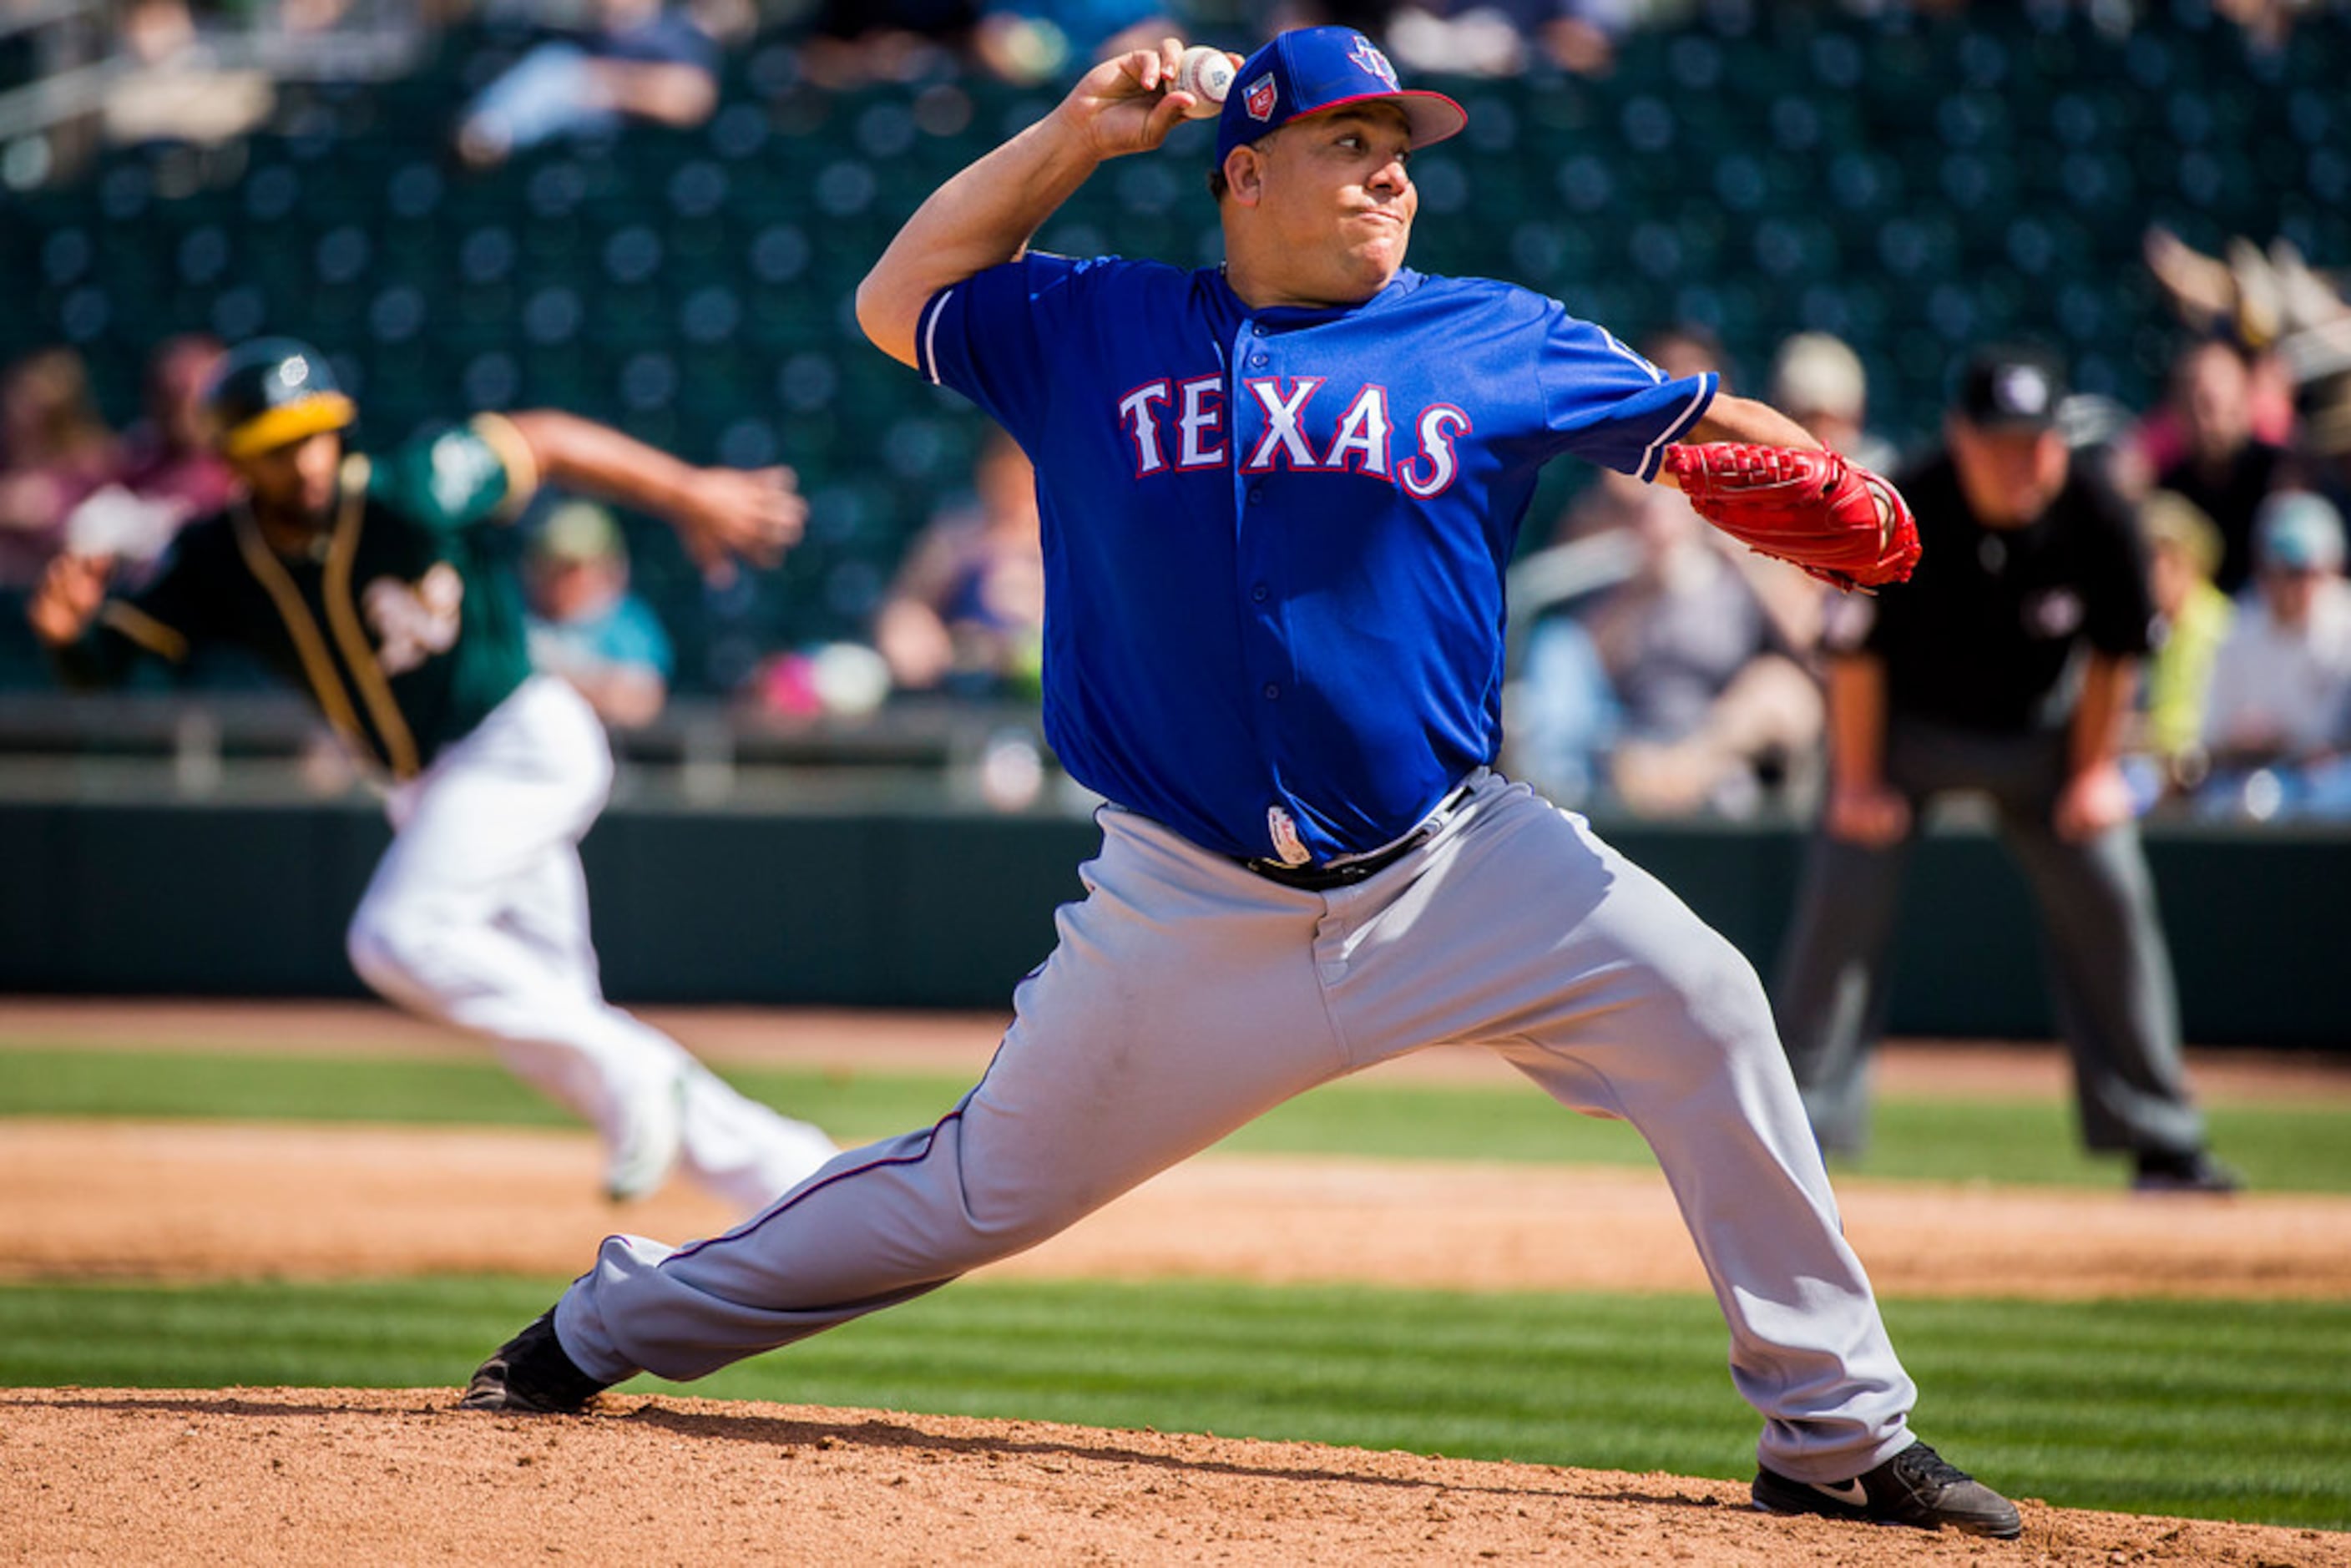 44-year-old Bartolo Colon could pitch his way into Rangers' rotation